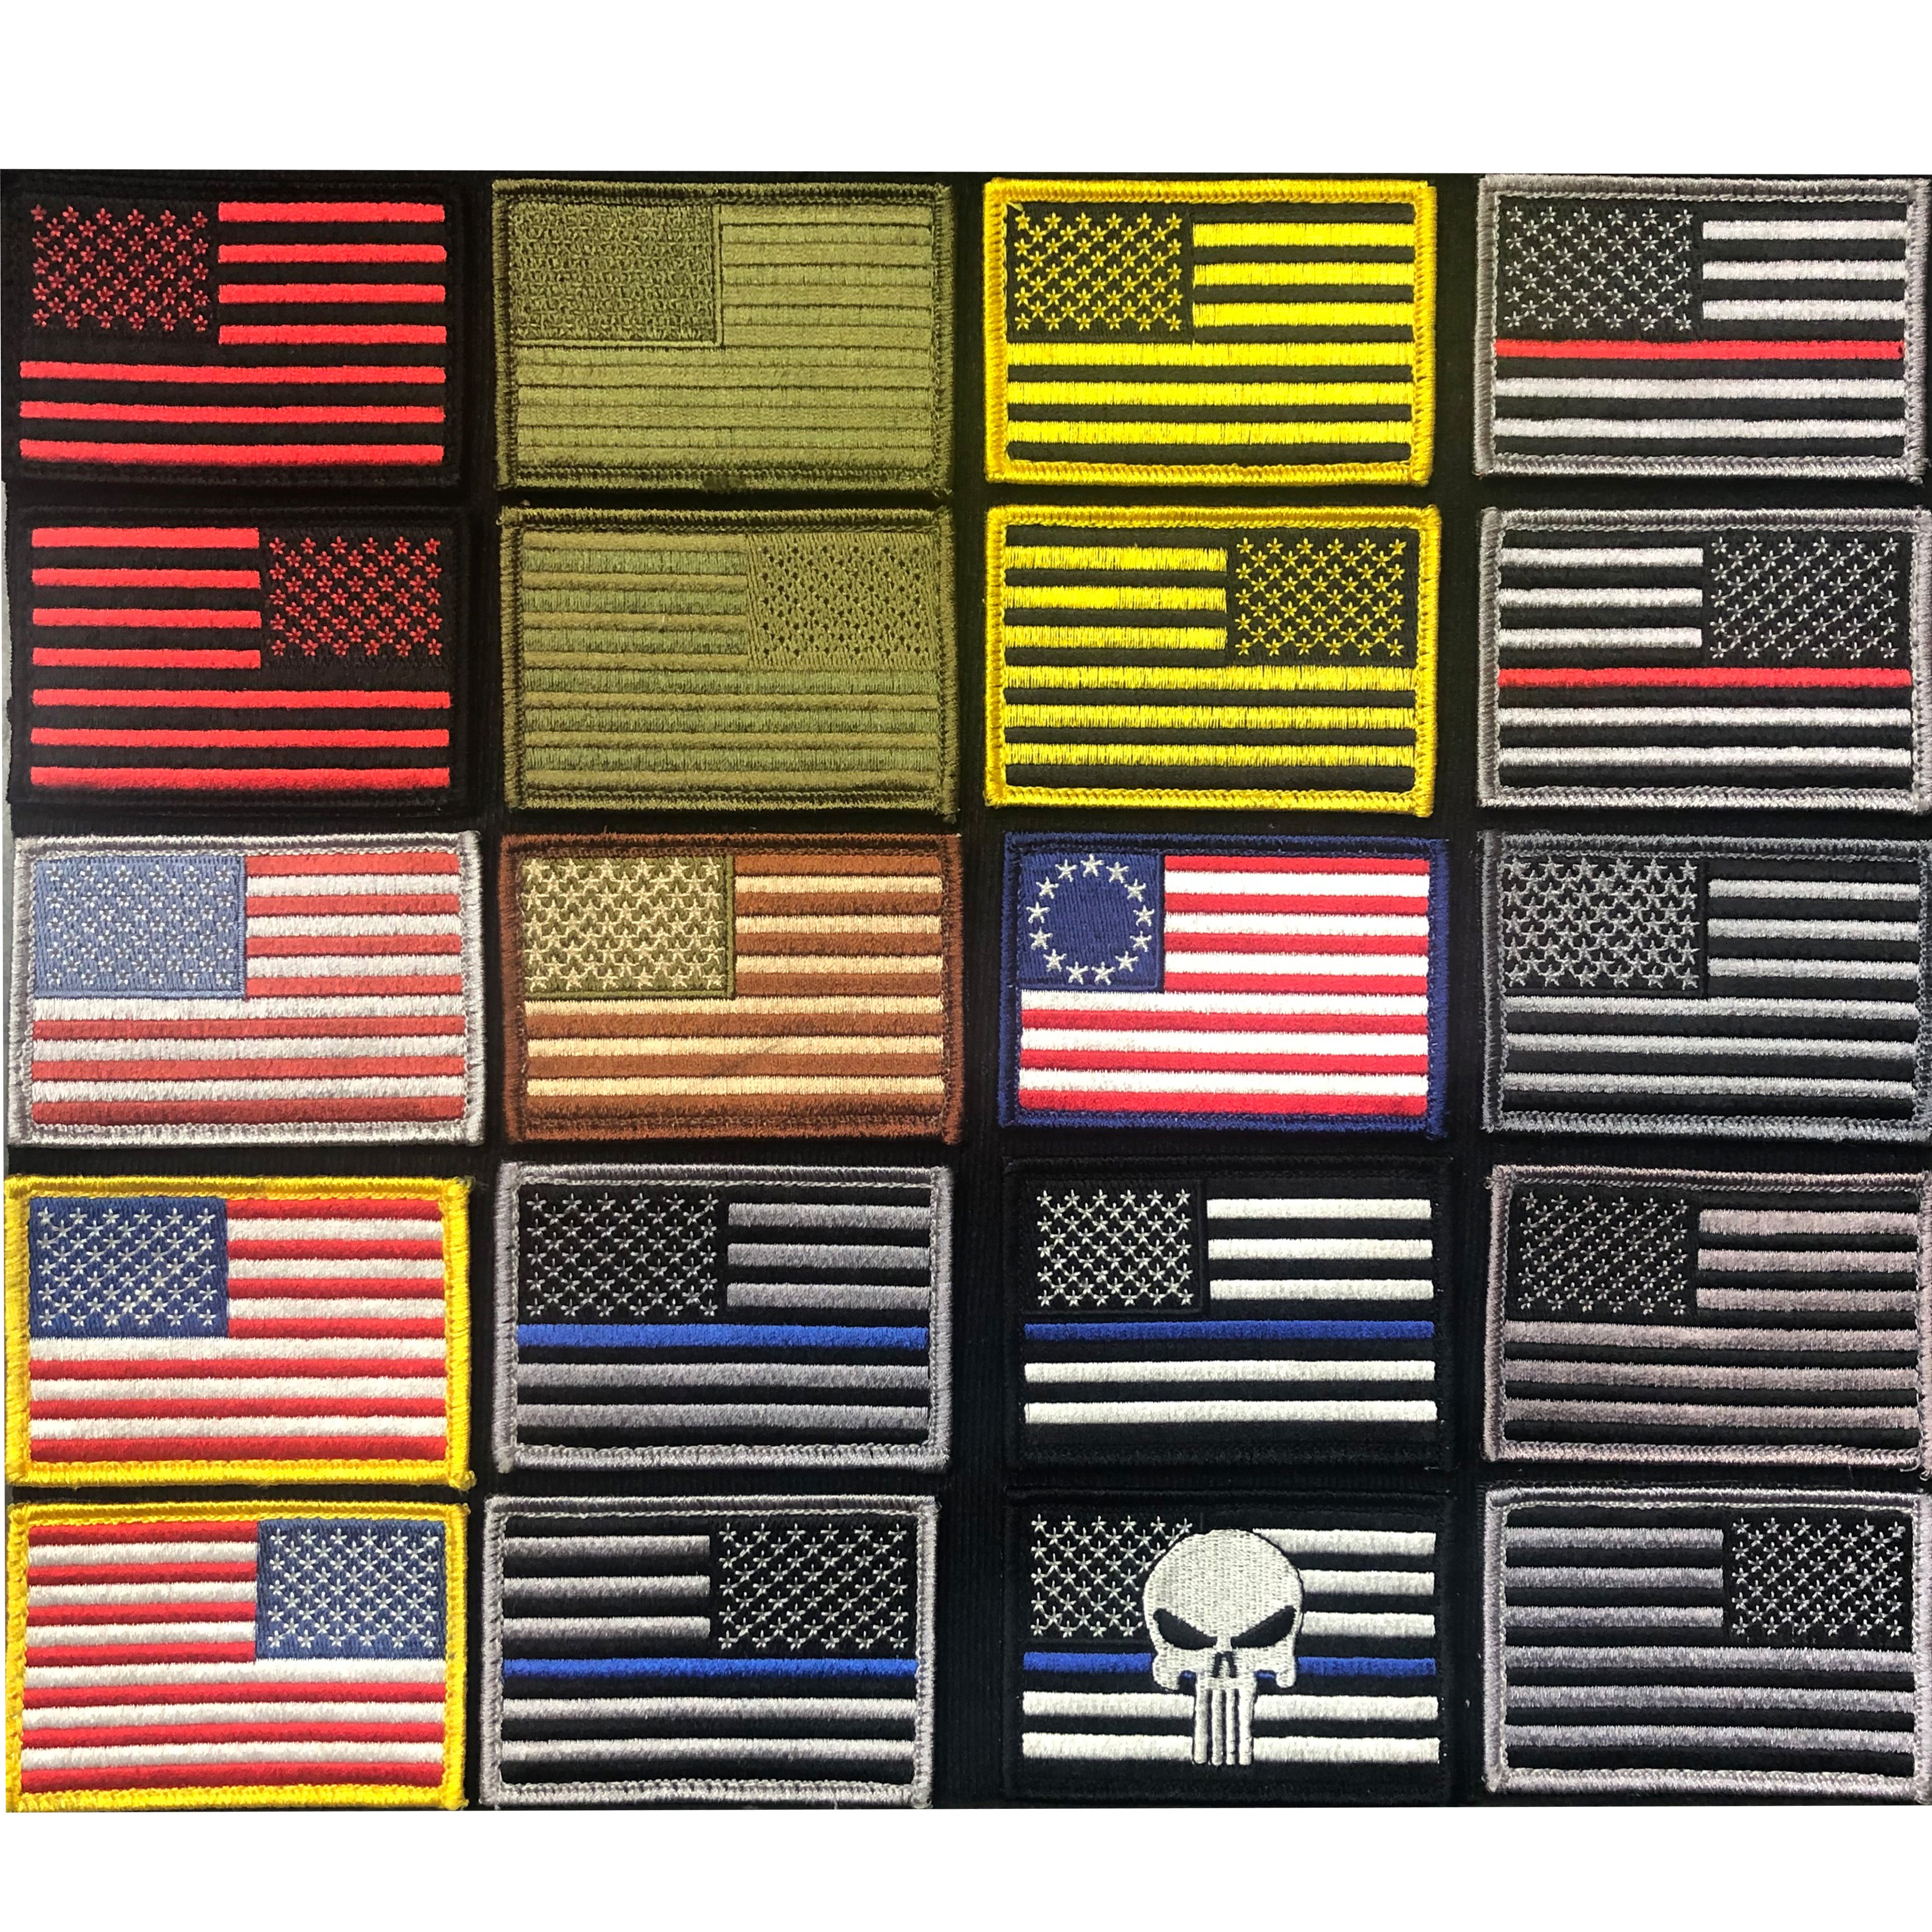 Morale Patches, Embroidered American Flag Patch - USA, Thin Blue Line, Thin Red Line 2 inch x 3 inch Patch w/ Velcro/Hook Backing, Green